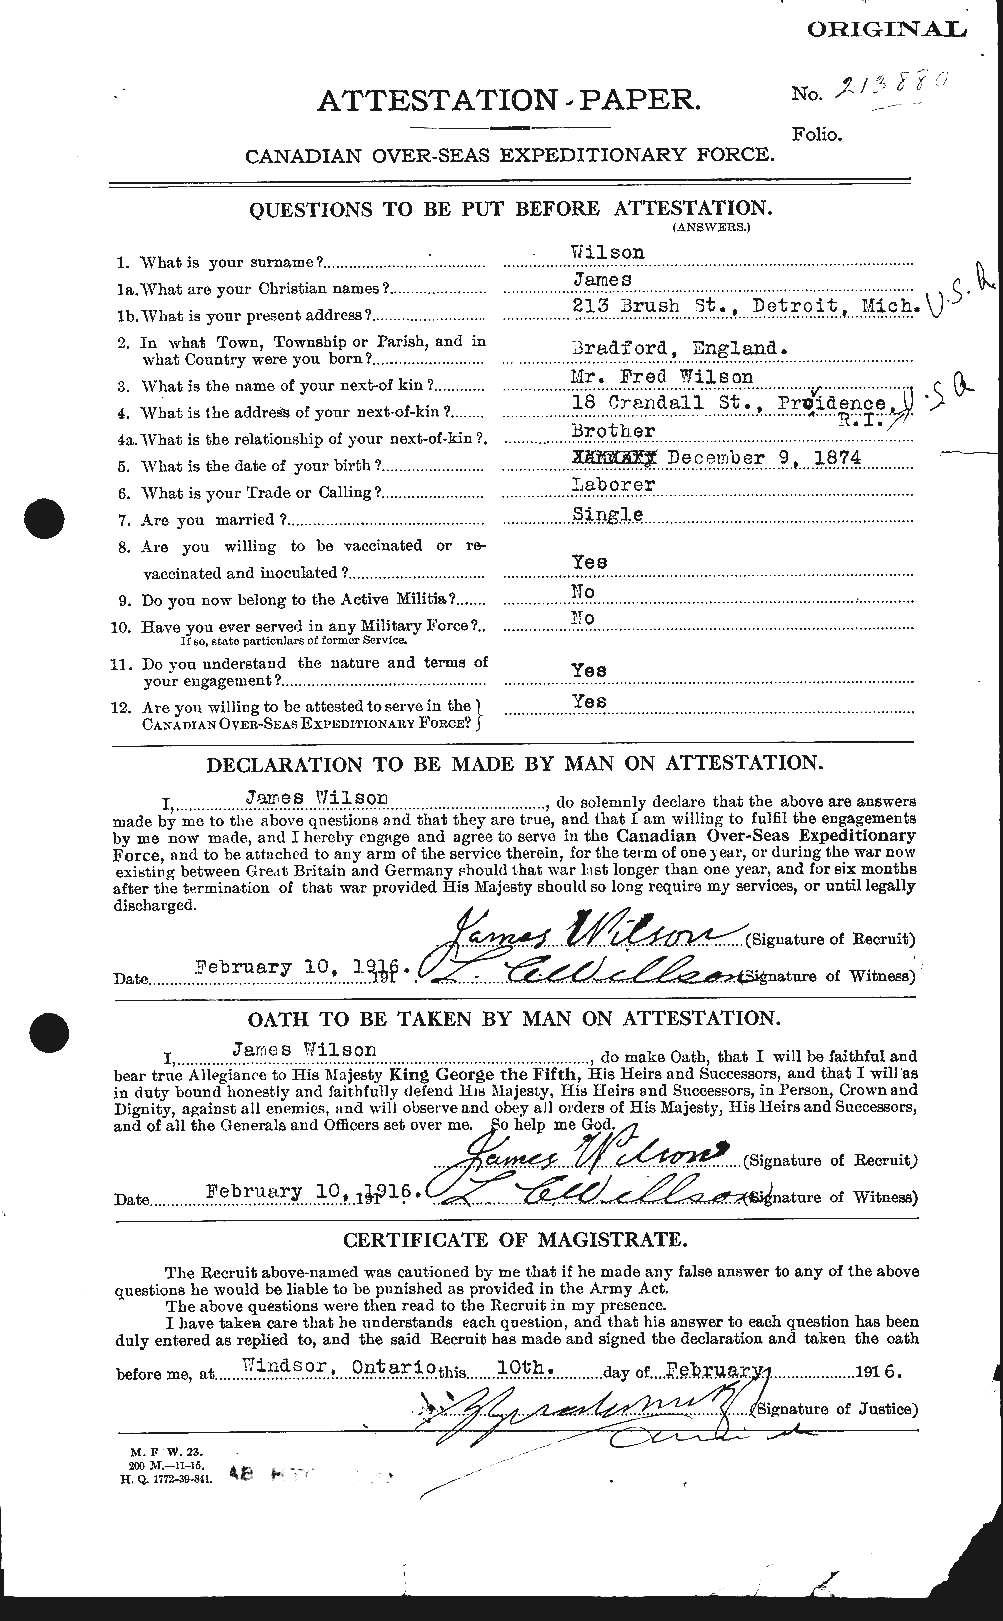 Personnel Records of the First World War - CEF 681344a